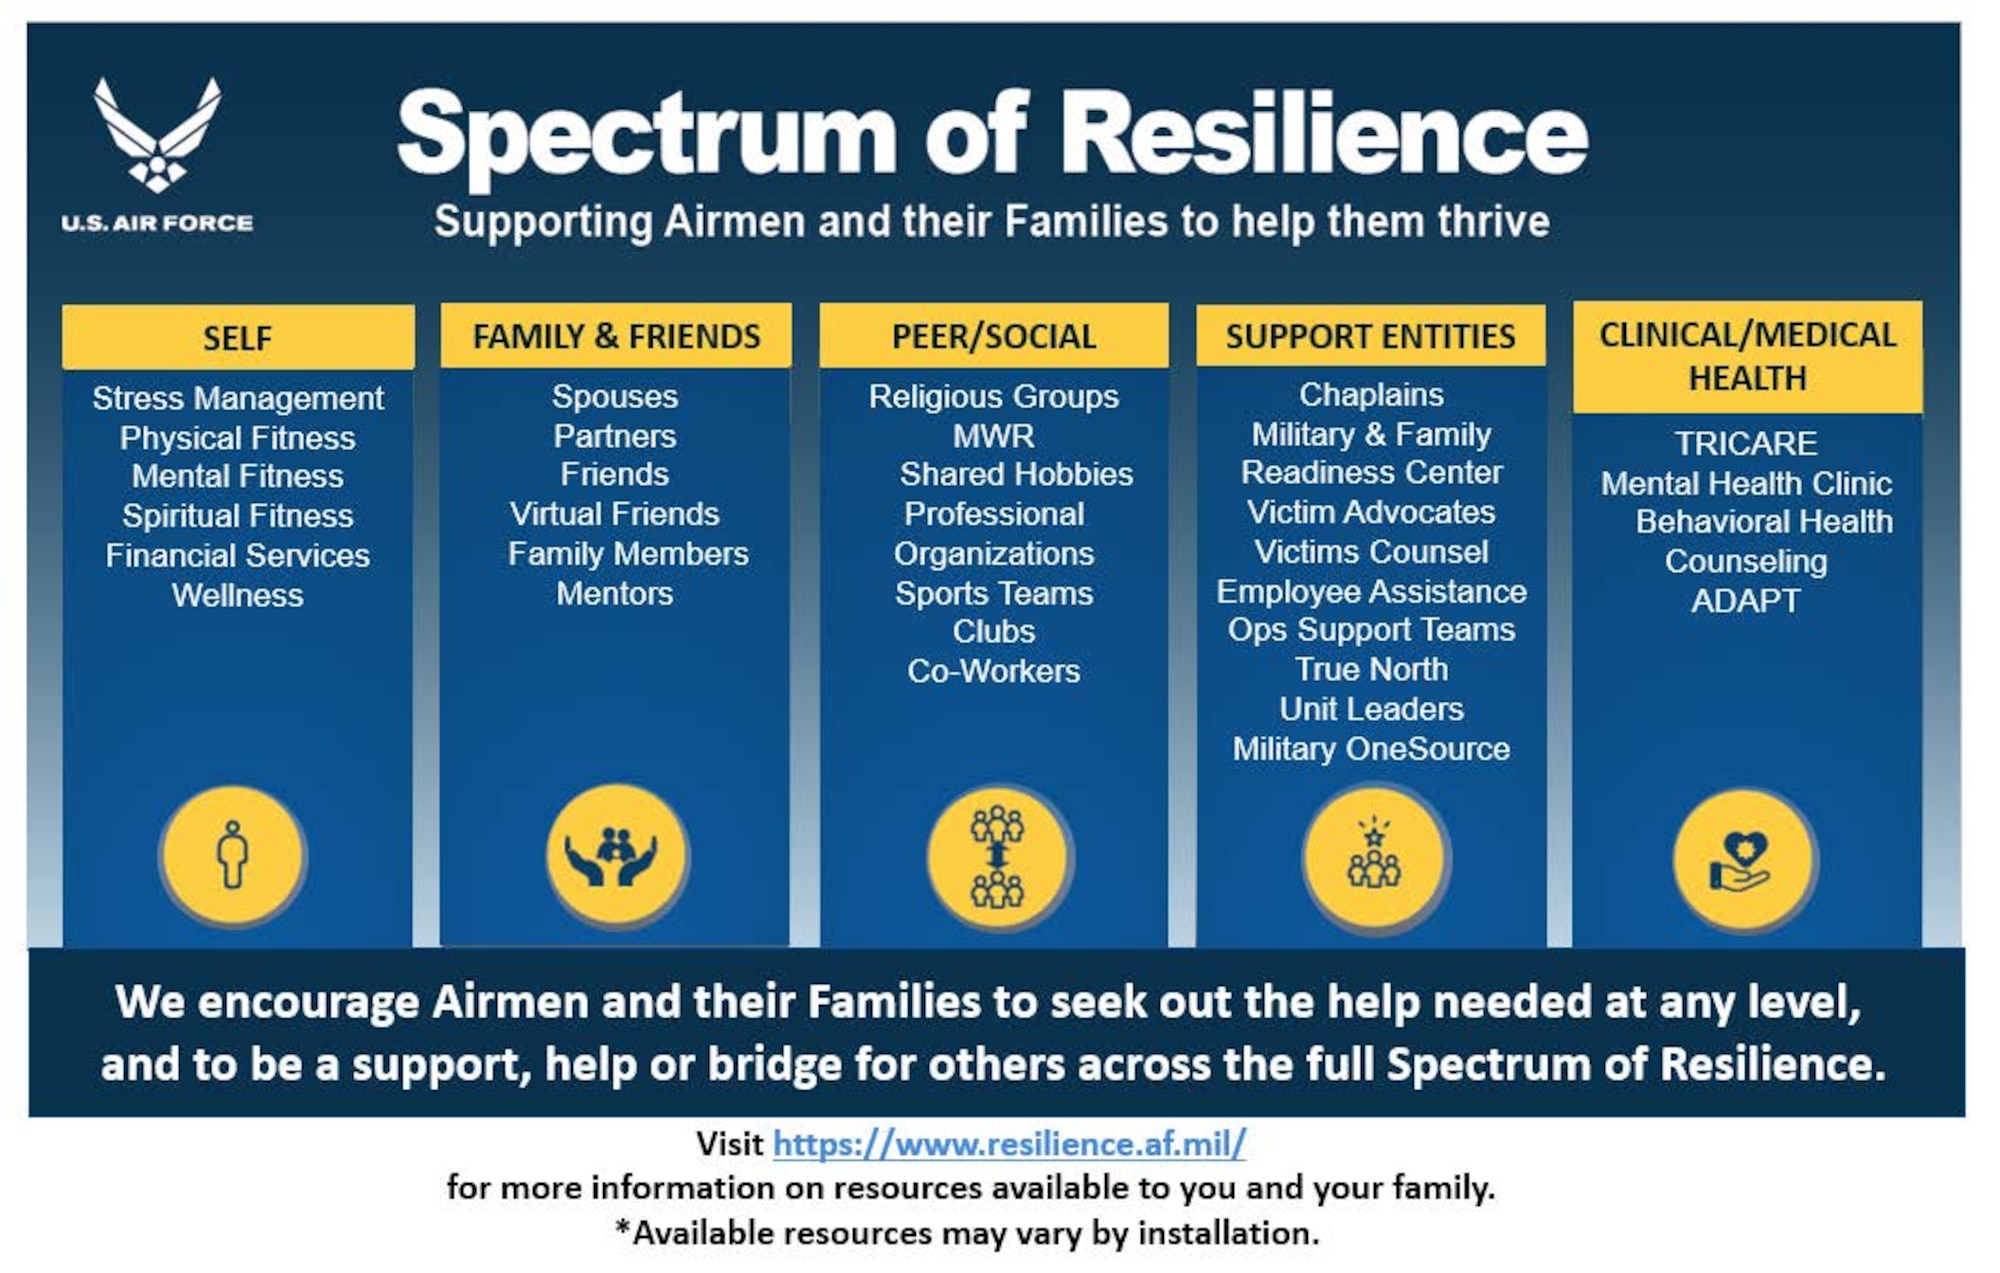 Spectrum of Resilience